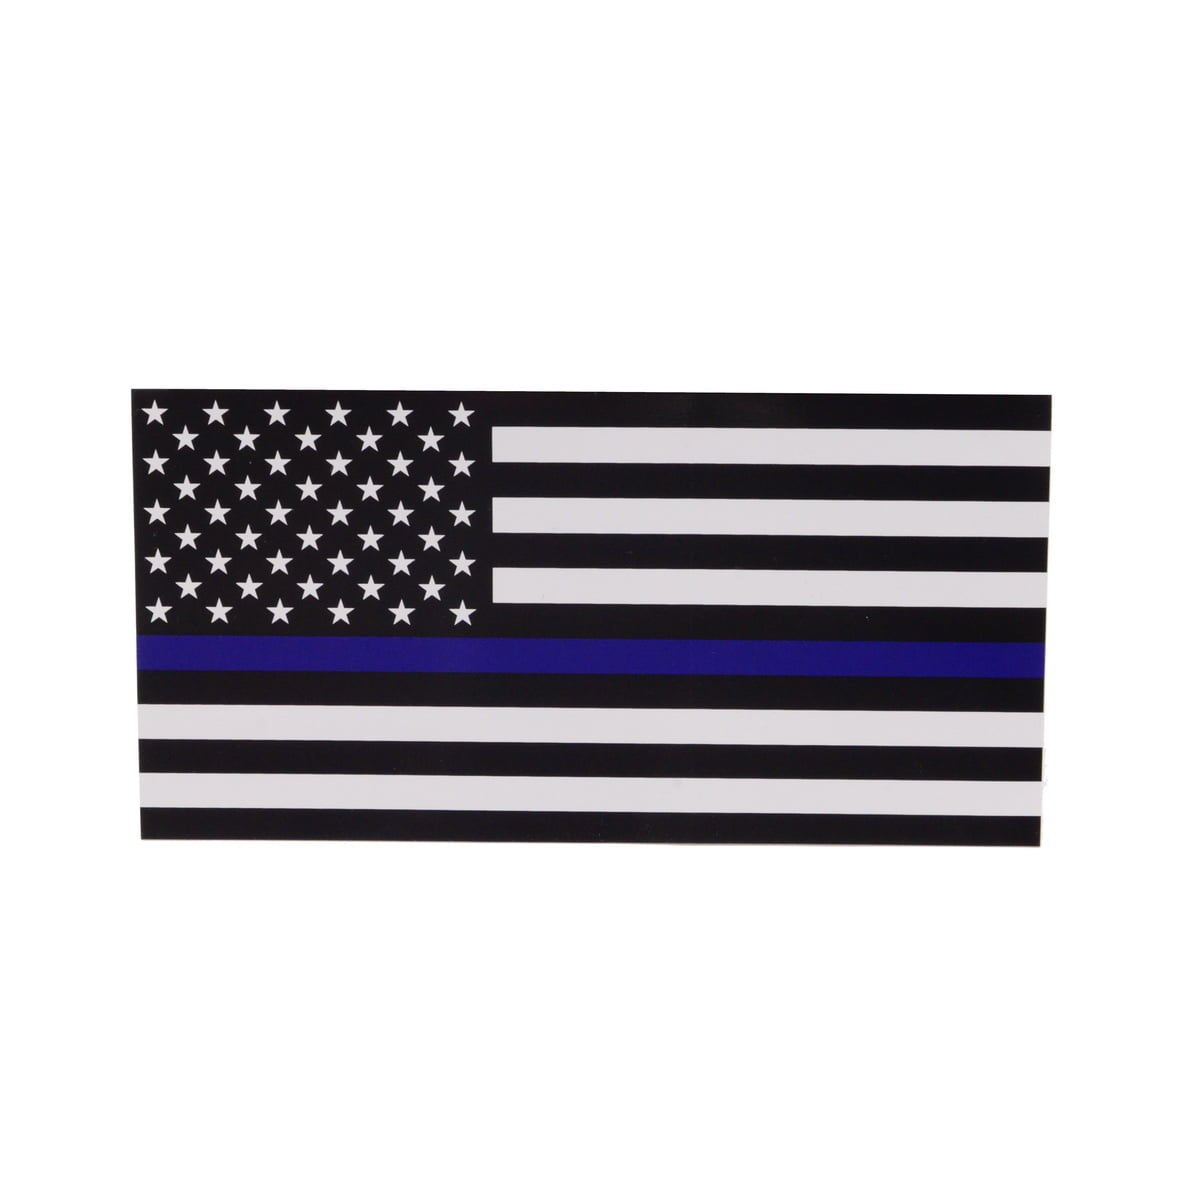 REFLECTIVE Thin Blue Line POLICE American Flag Hard Hat Helmet Stickers Flags 